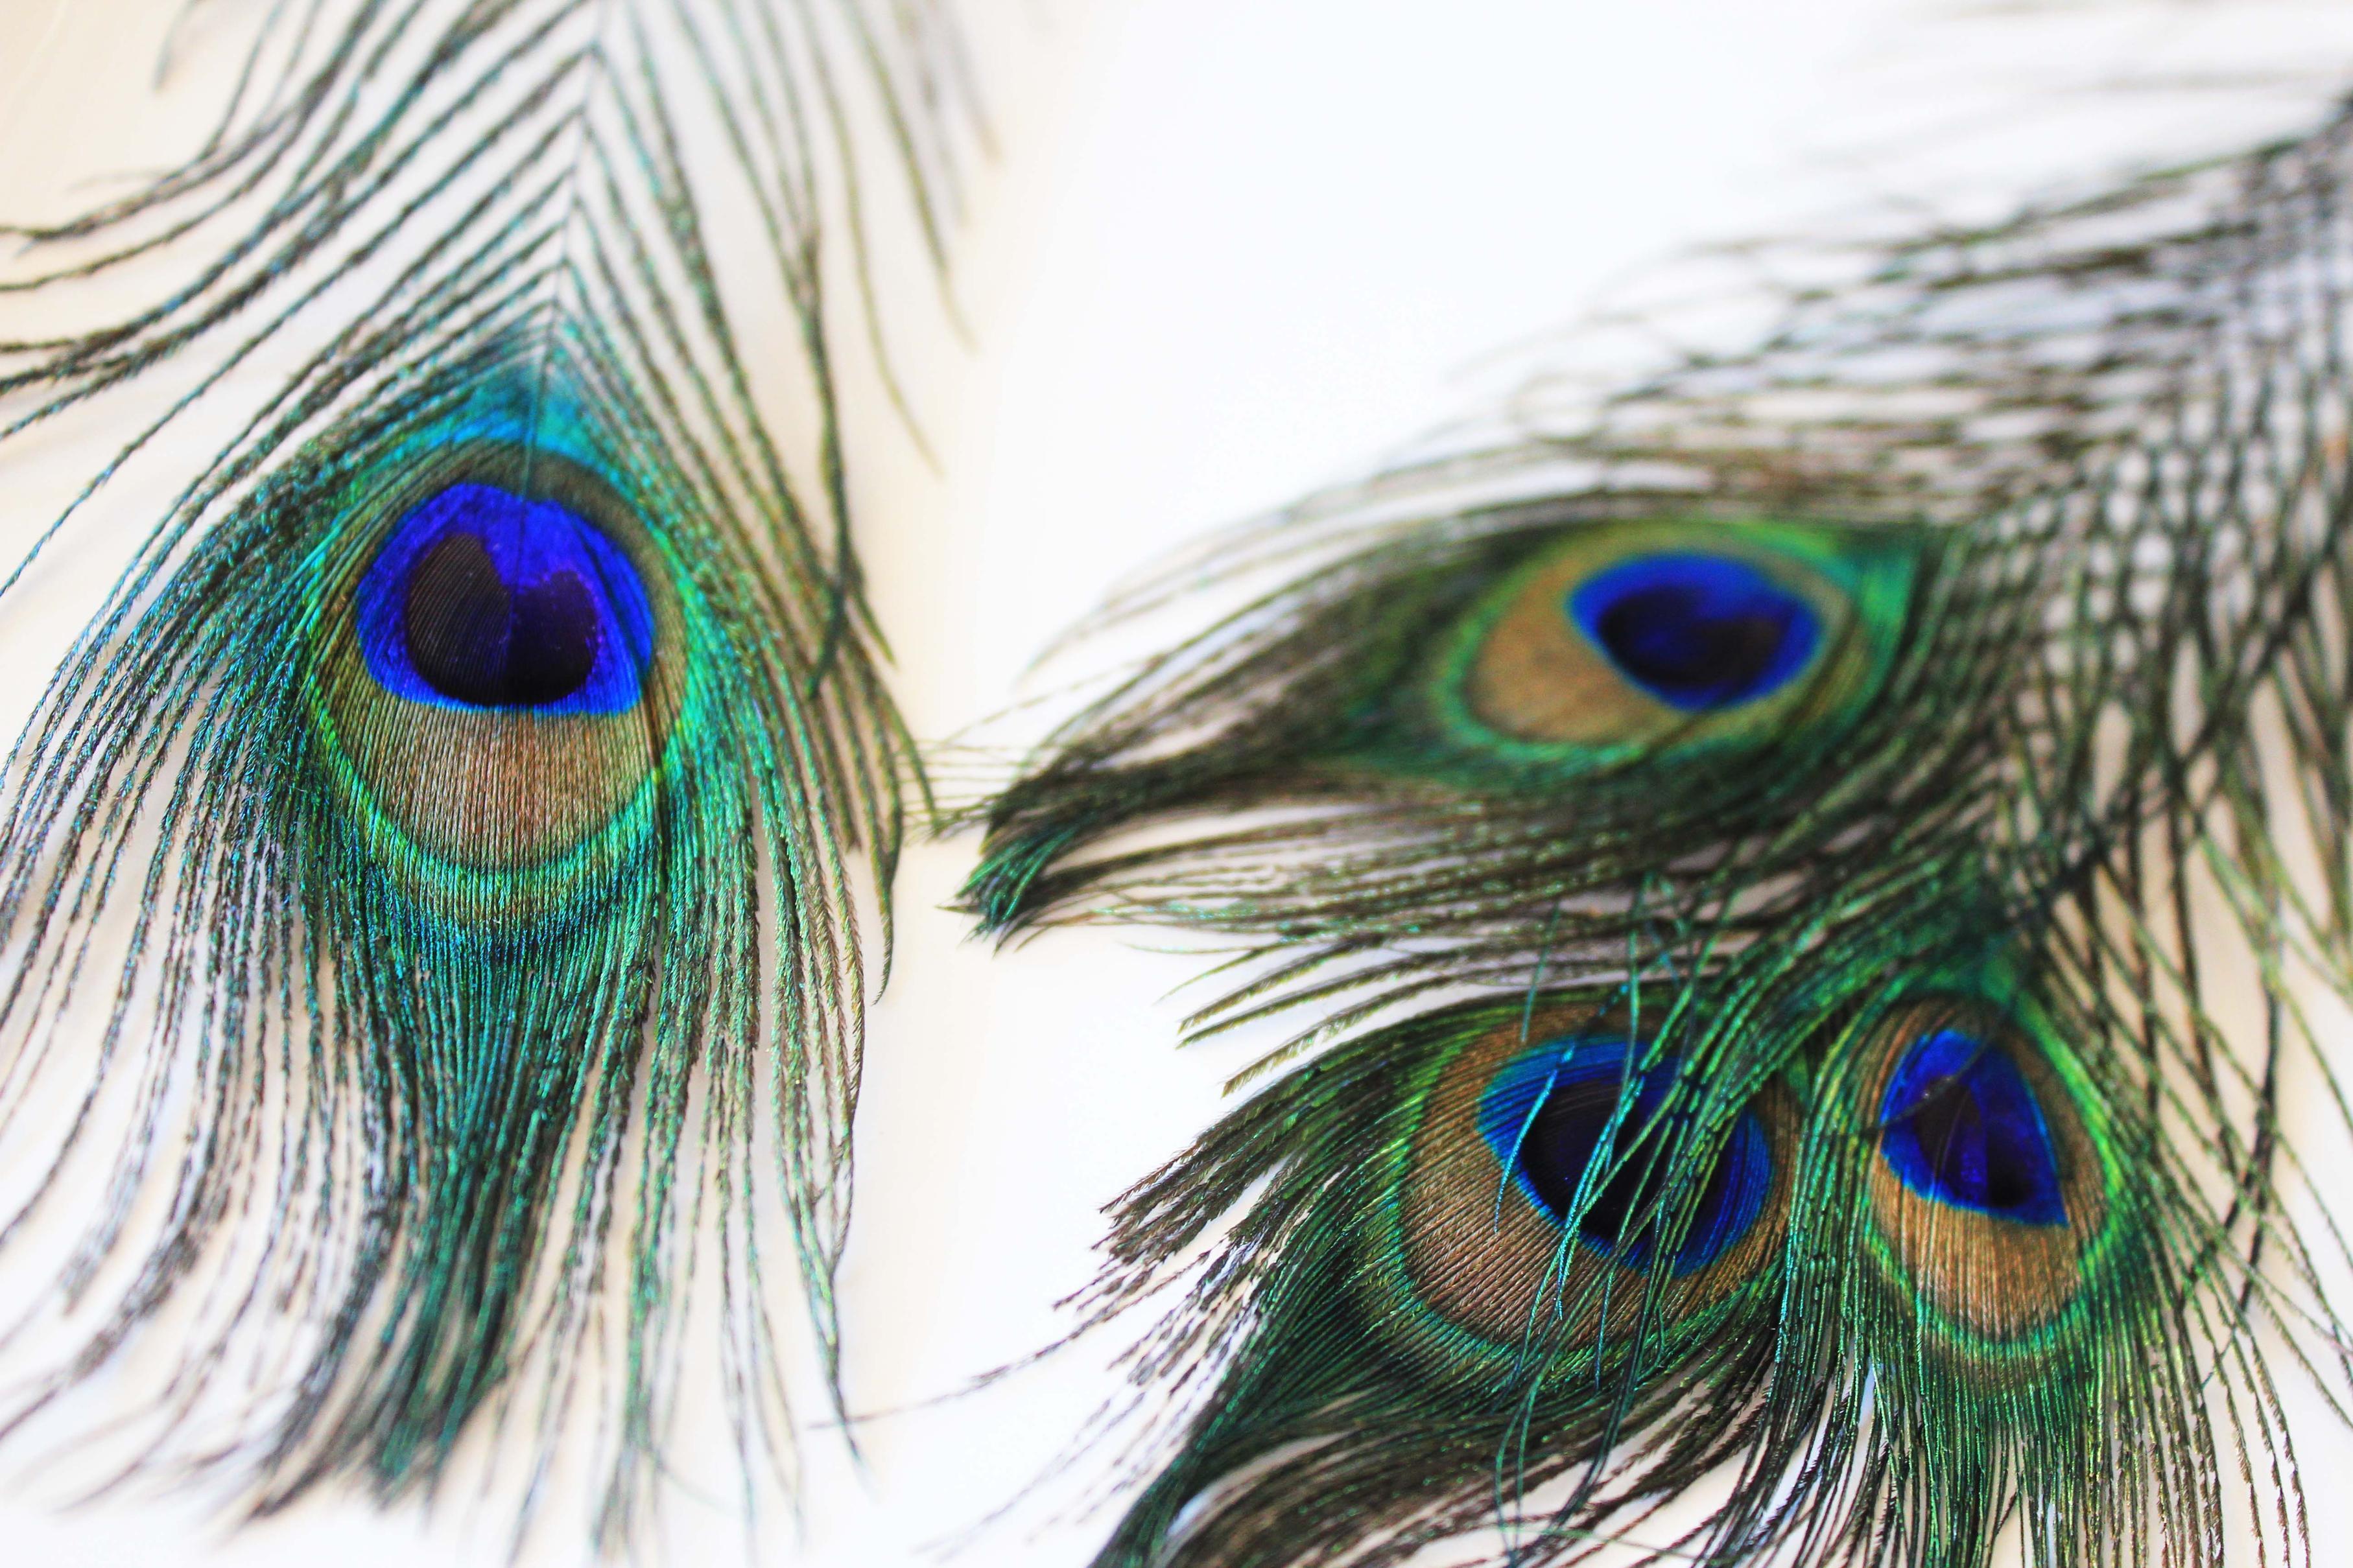 Peacock Feather Wallpaper Uk - Wallpapers Of Peacock Feathers Hd 2016 ...